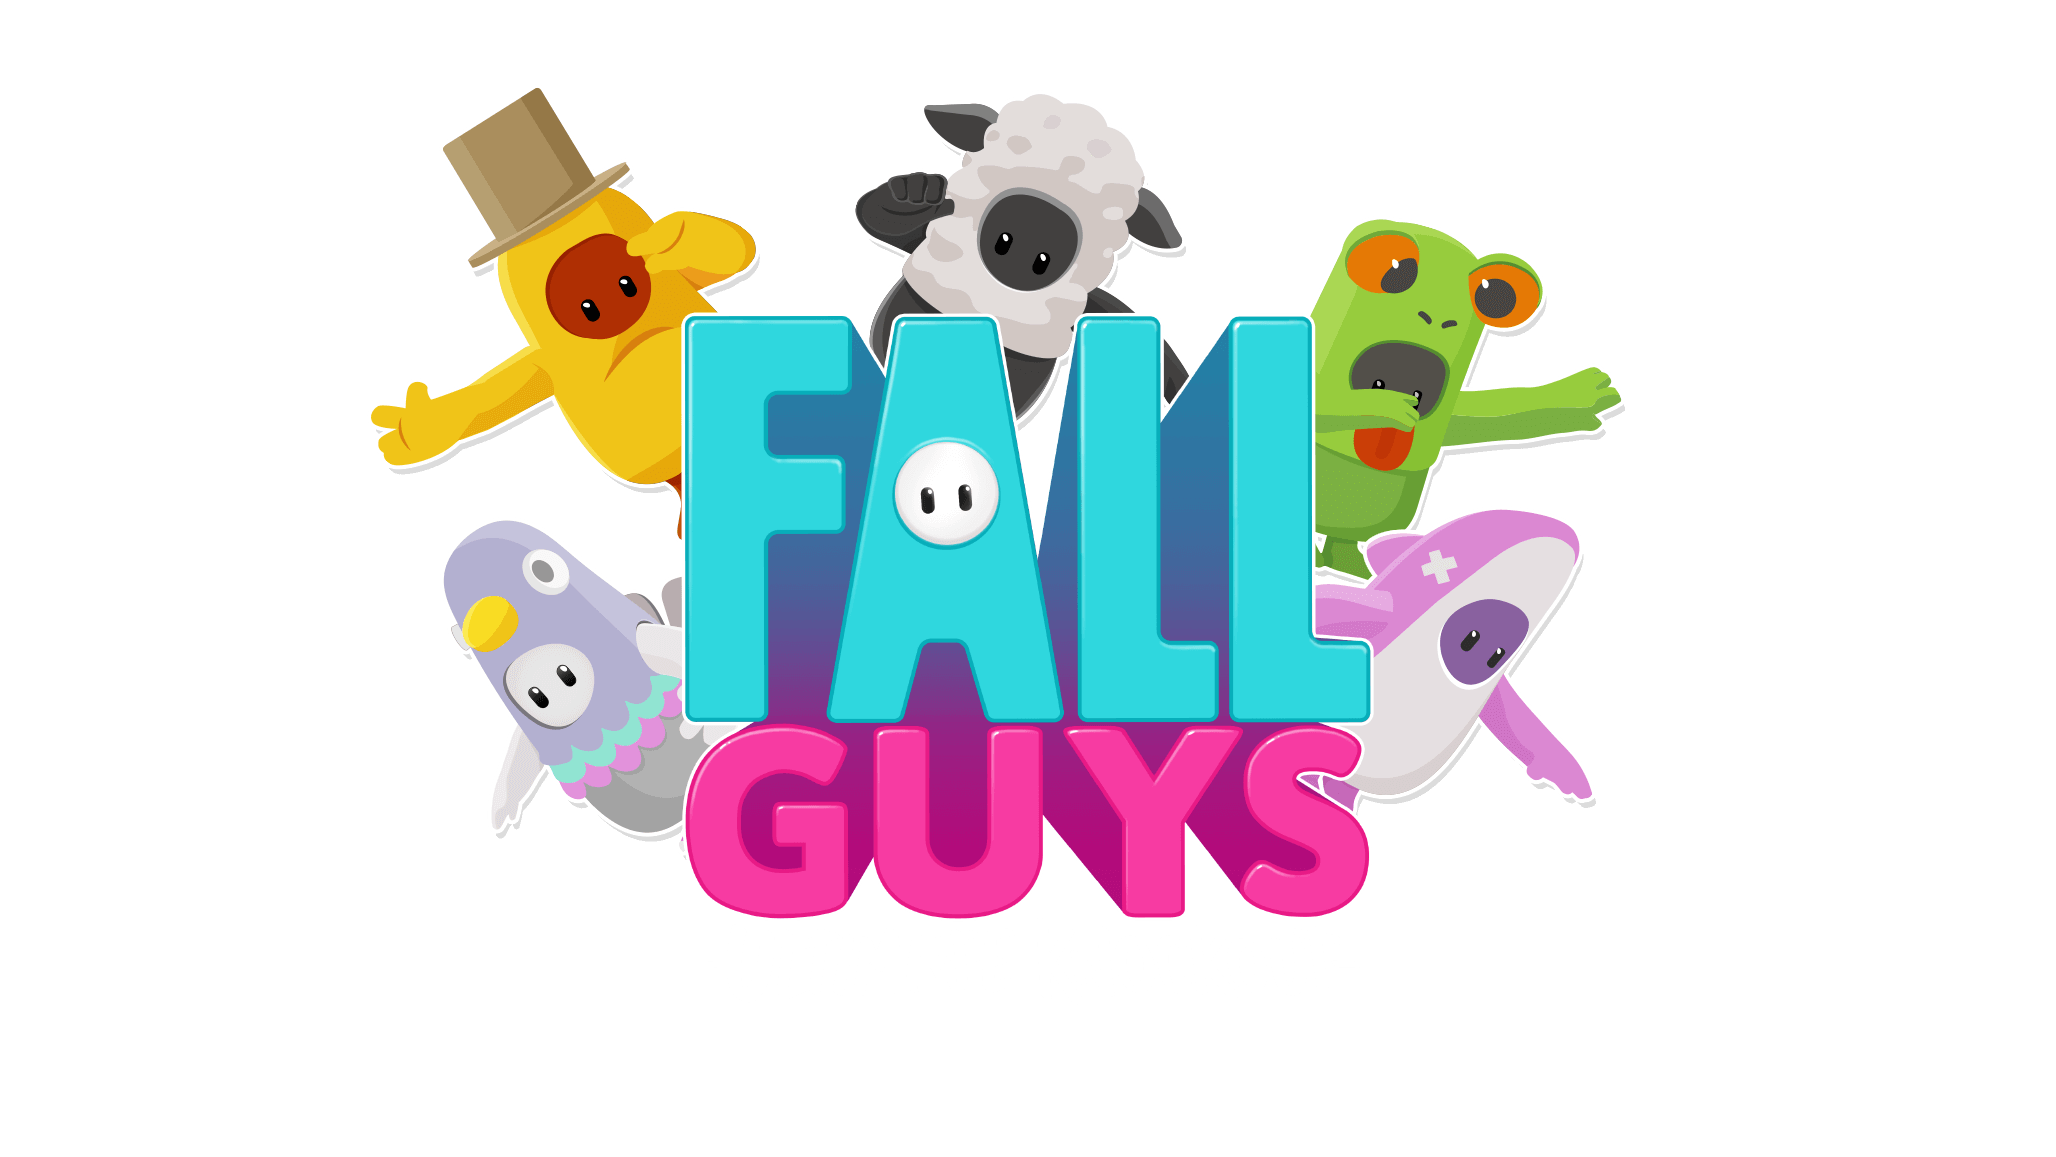 Fall Guys is heading to Switch this summer